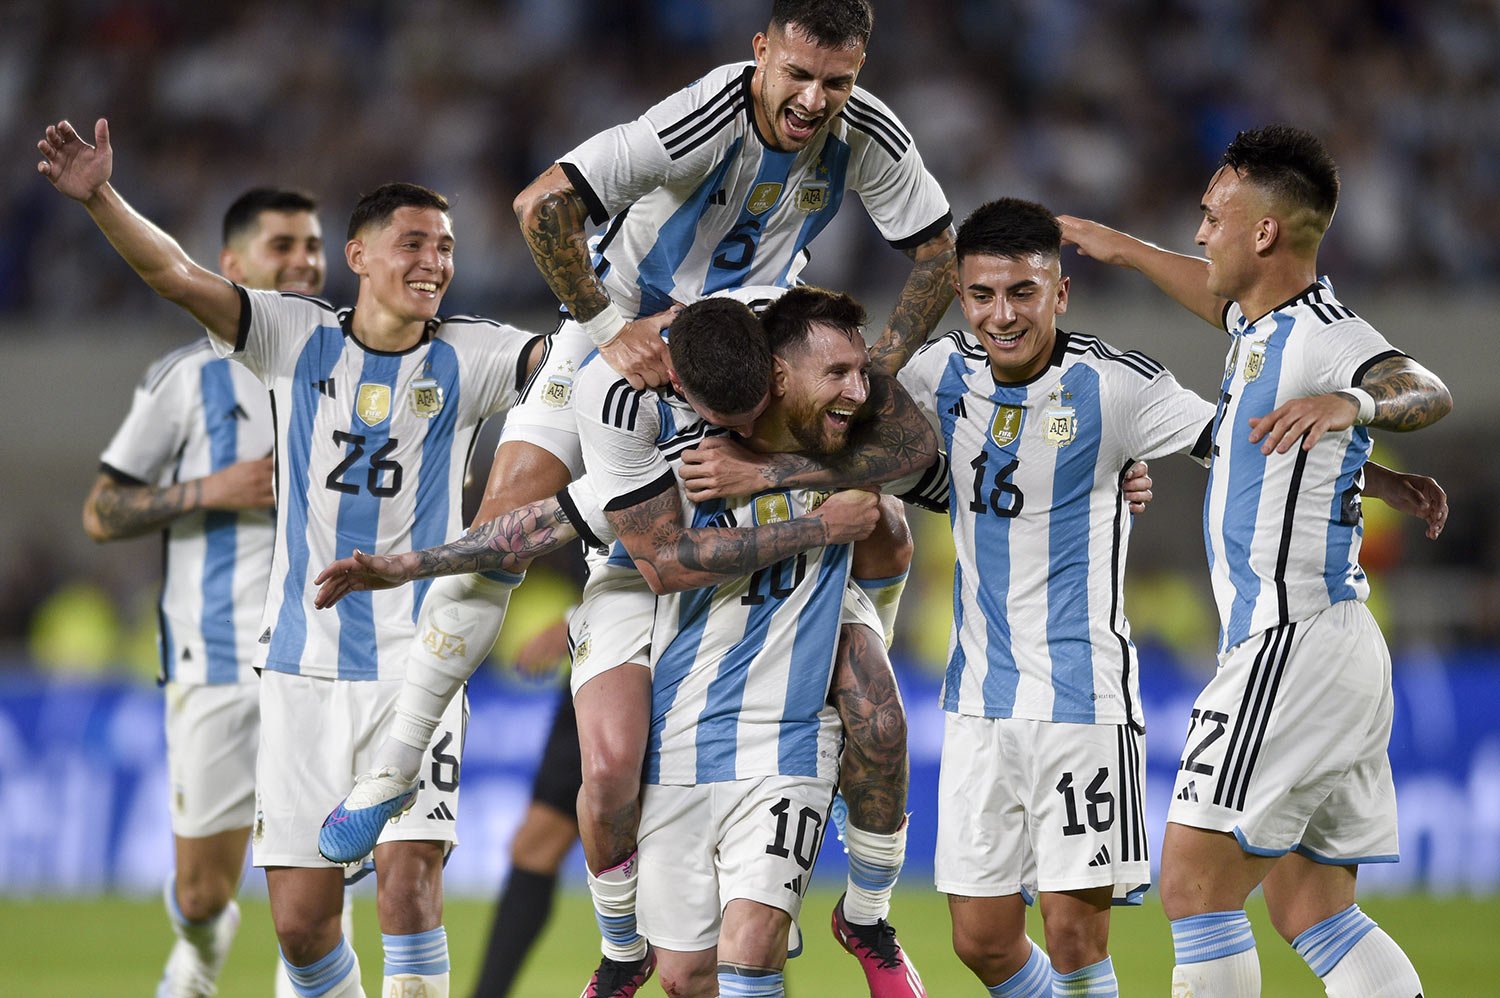  Argentina's Lionel Messi (10) celebrates with teammates after scoring his side's second goal against Panama at an international friendly soccer match in Buenos Aires, Argentina, March 23, 2023. (AP Photo/Gustavo Garello) 